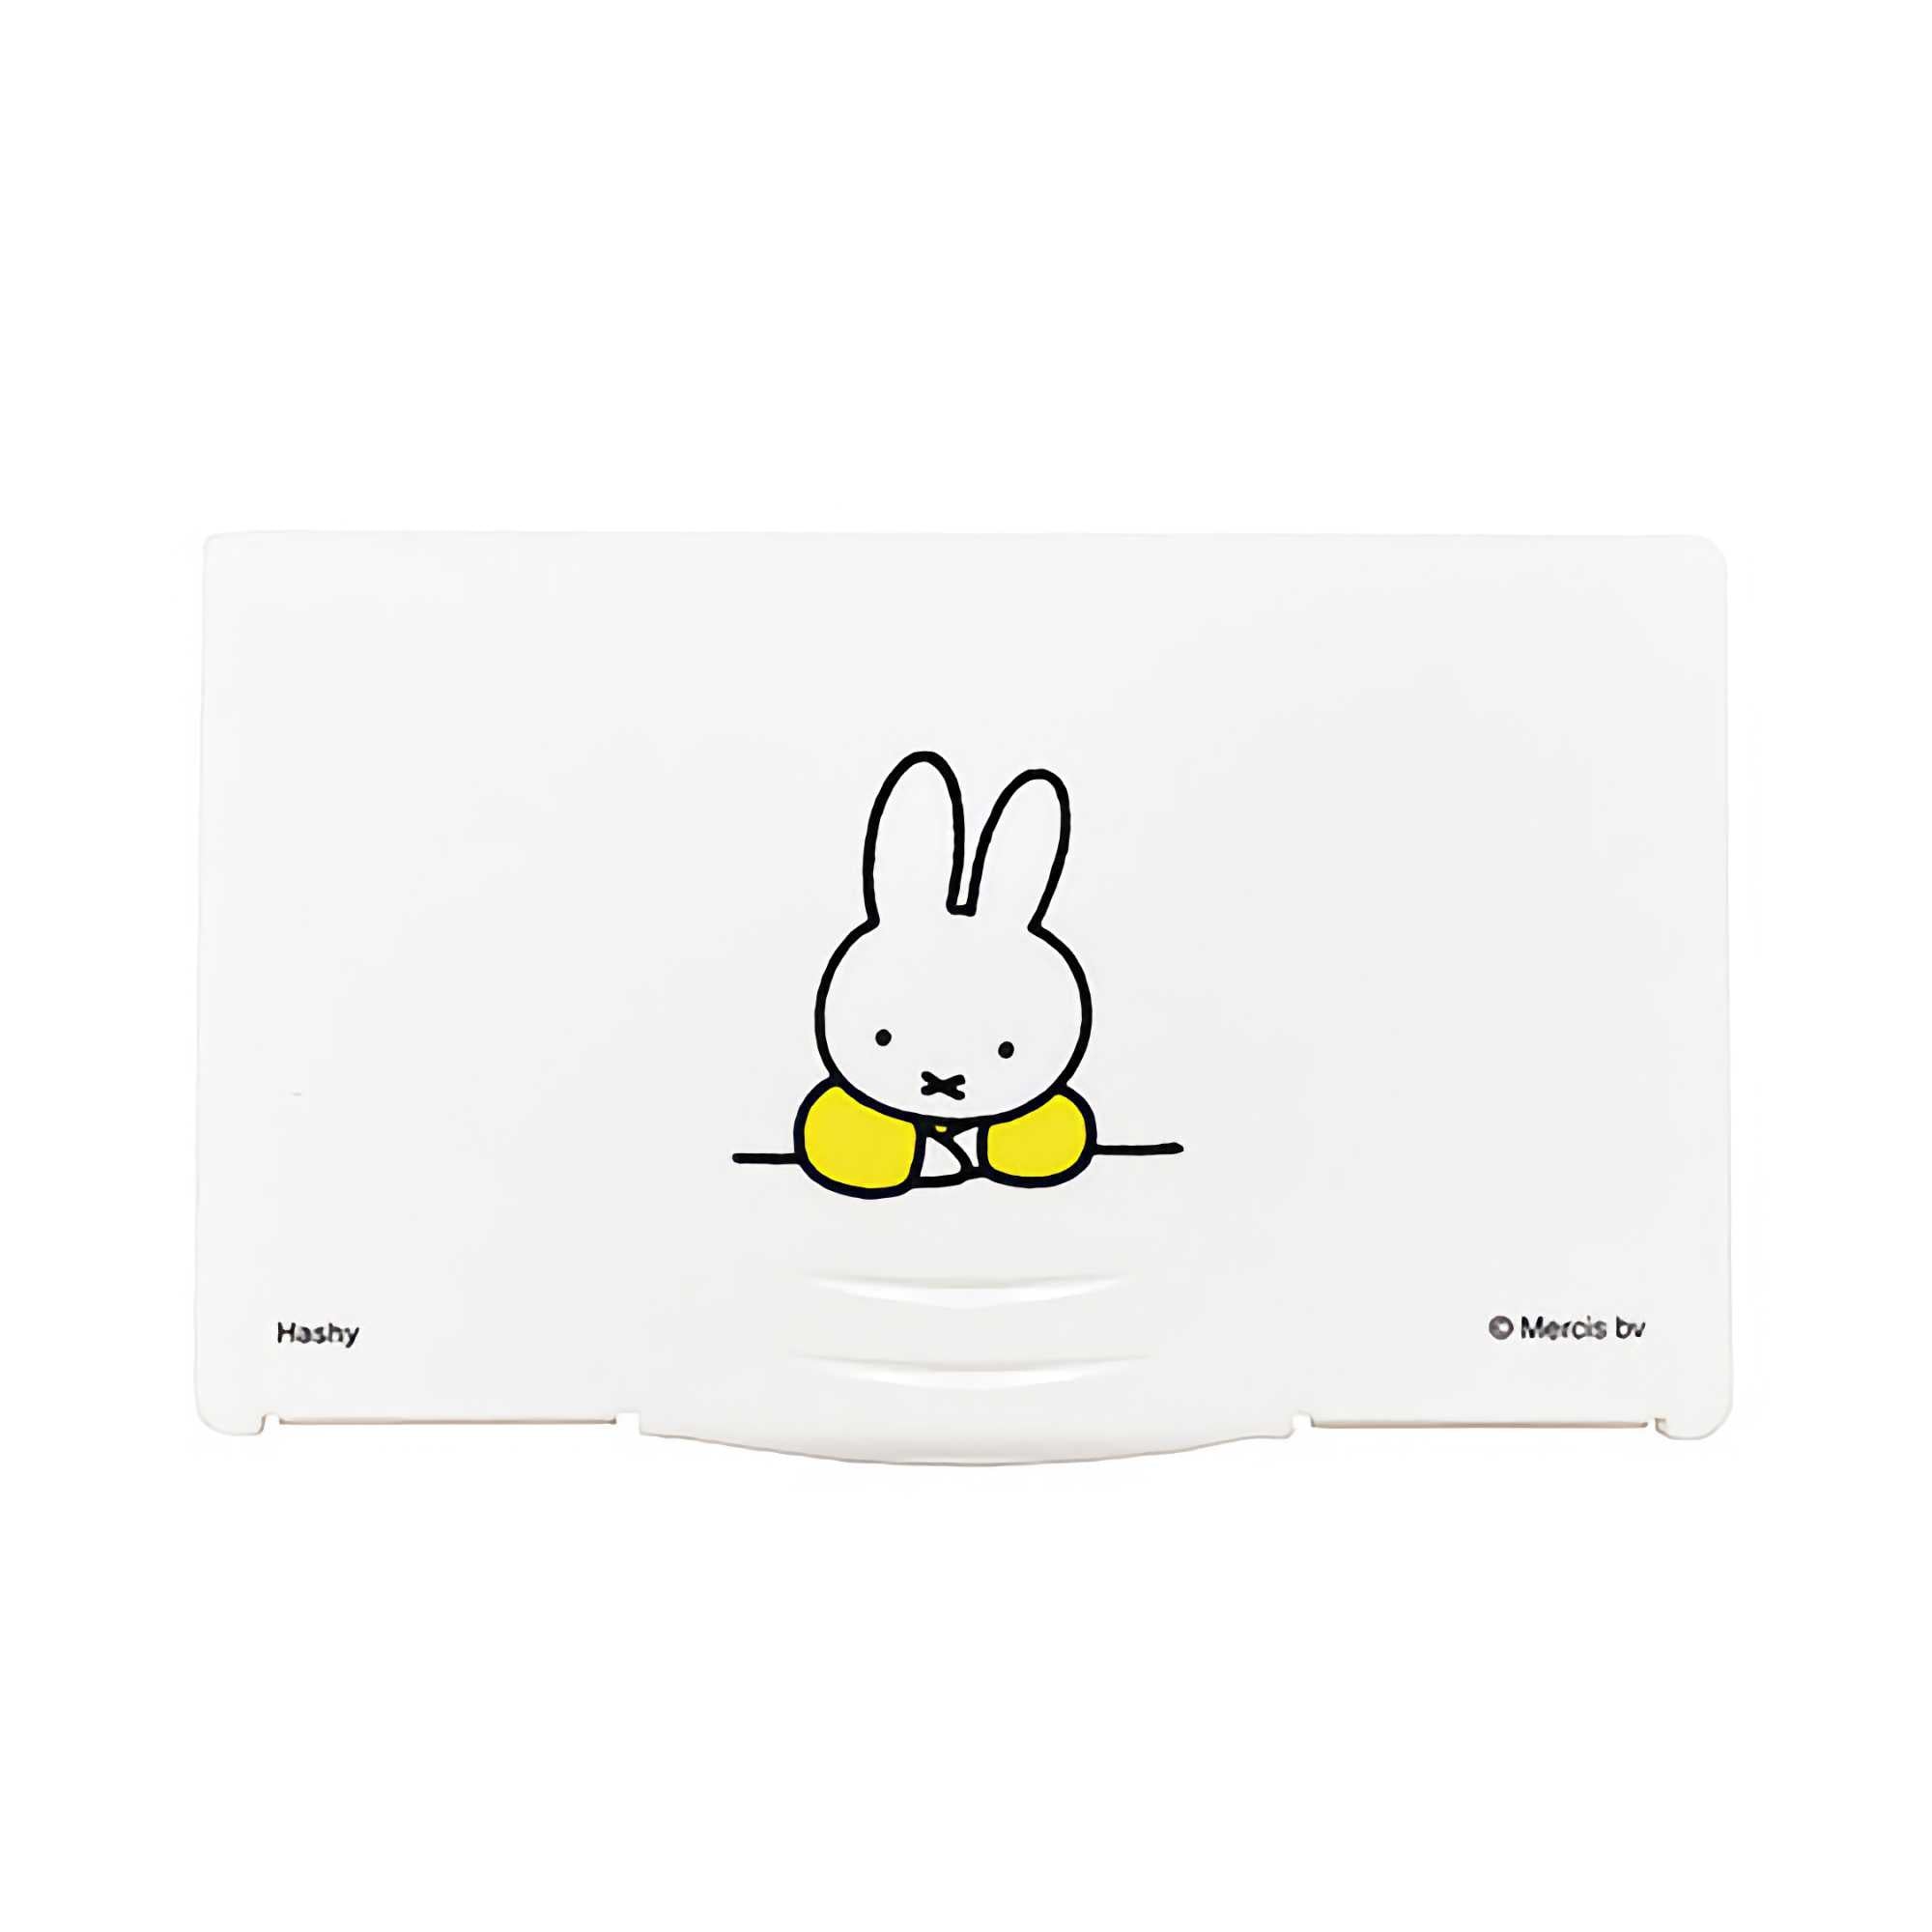 Miffy mask case, elbow